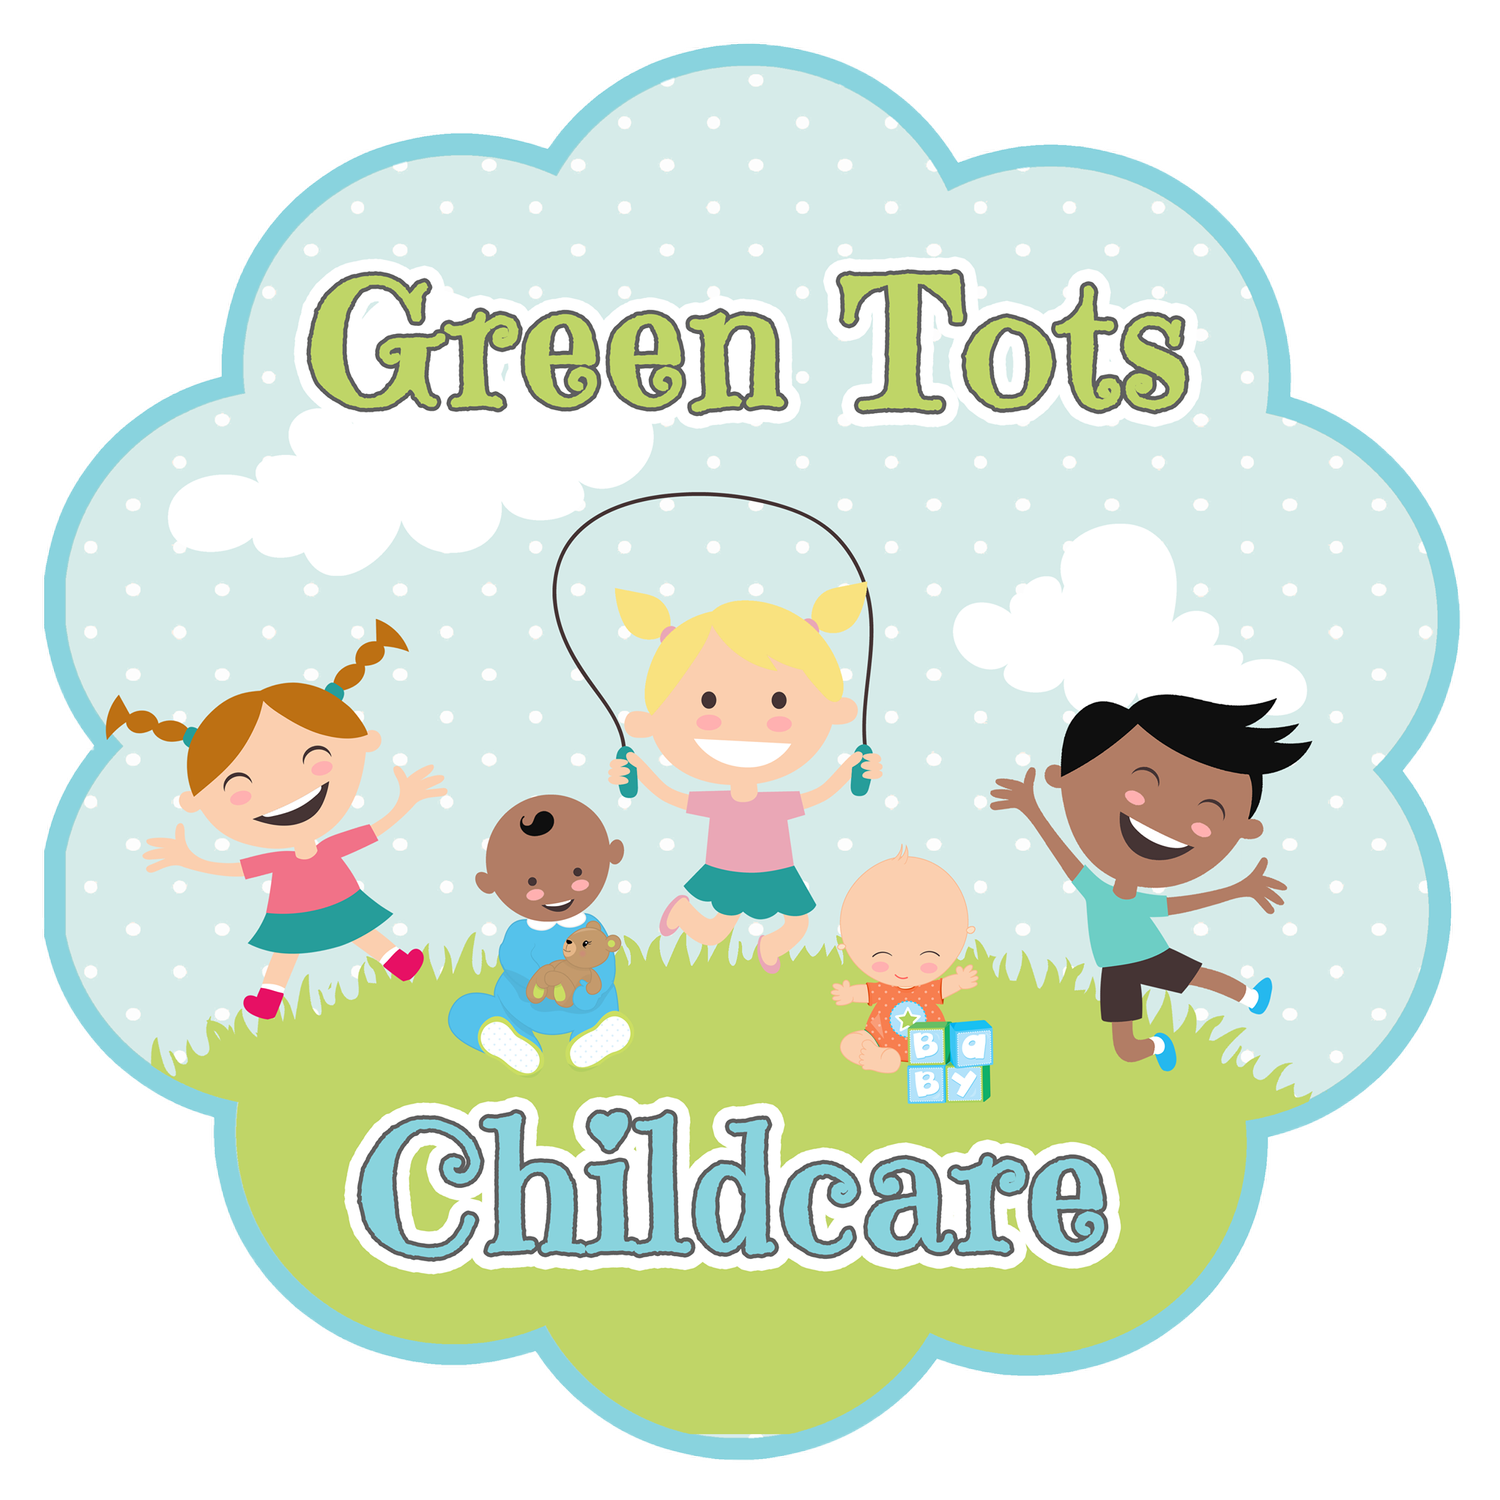 Green Tots Childcare